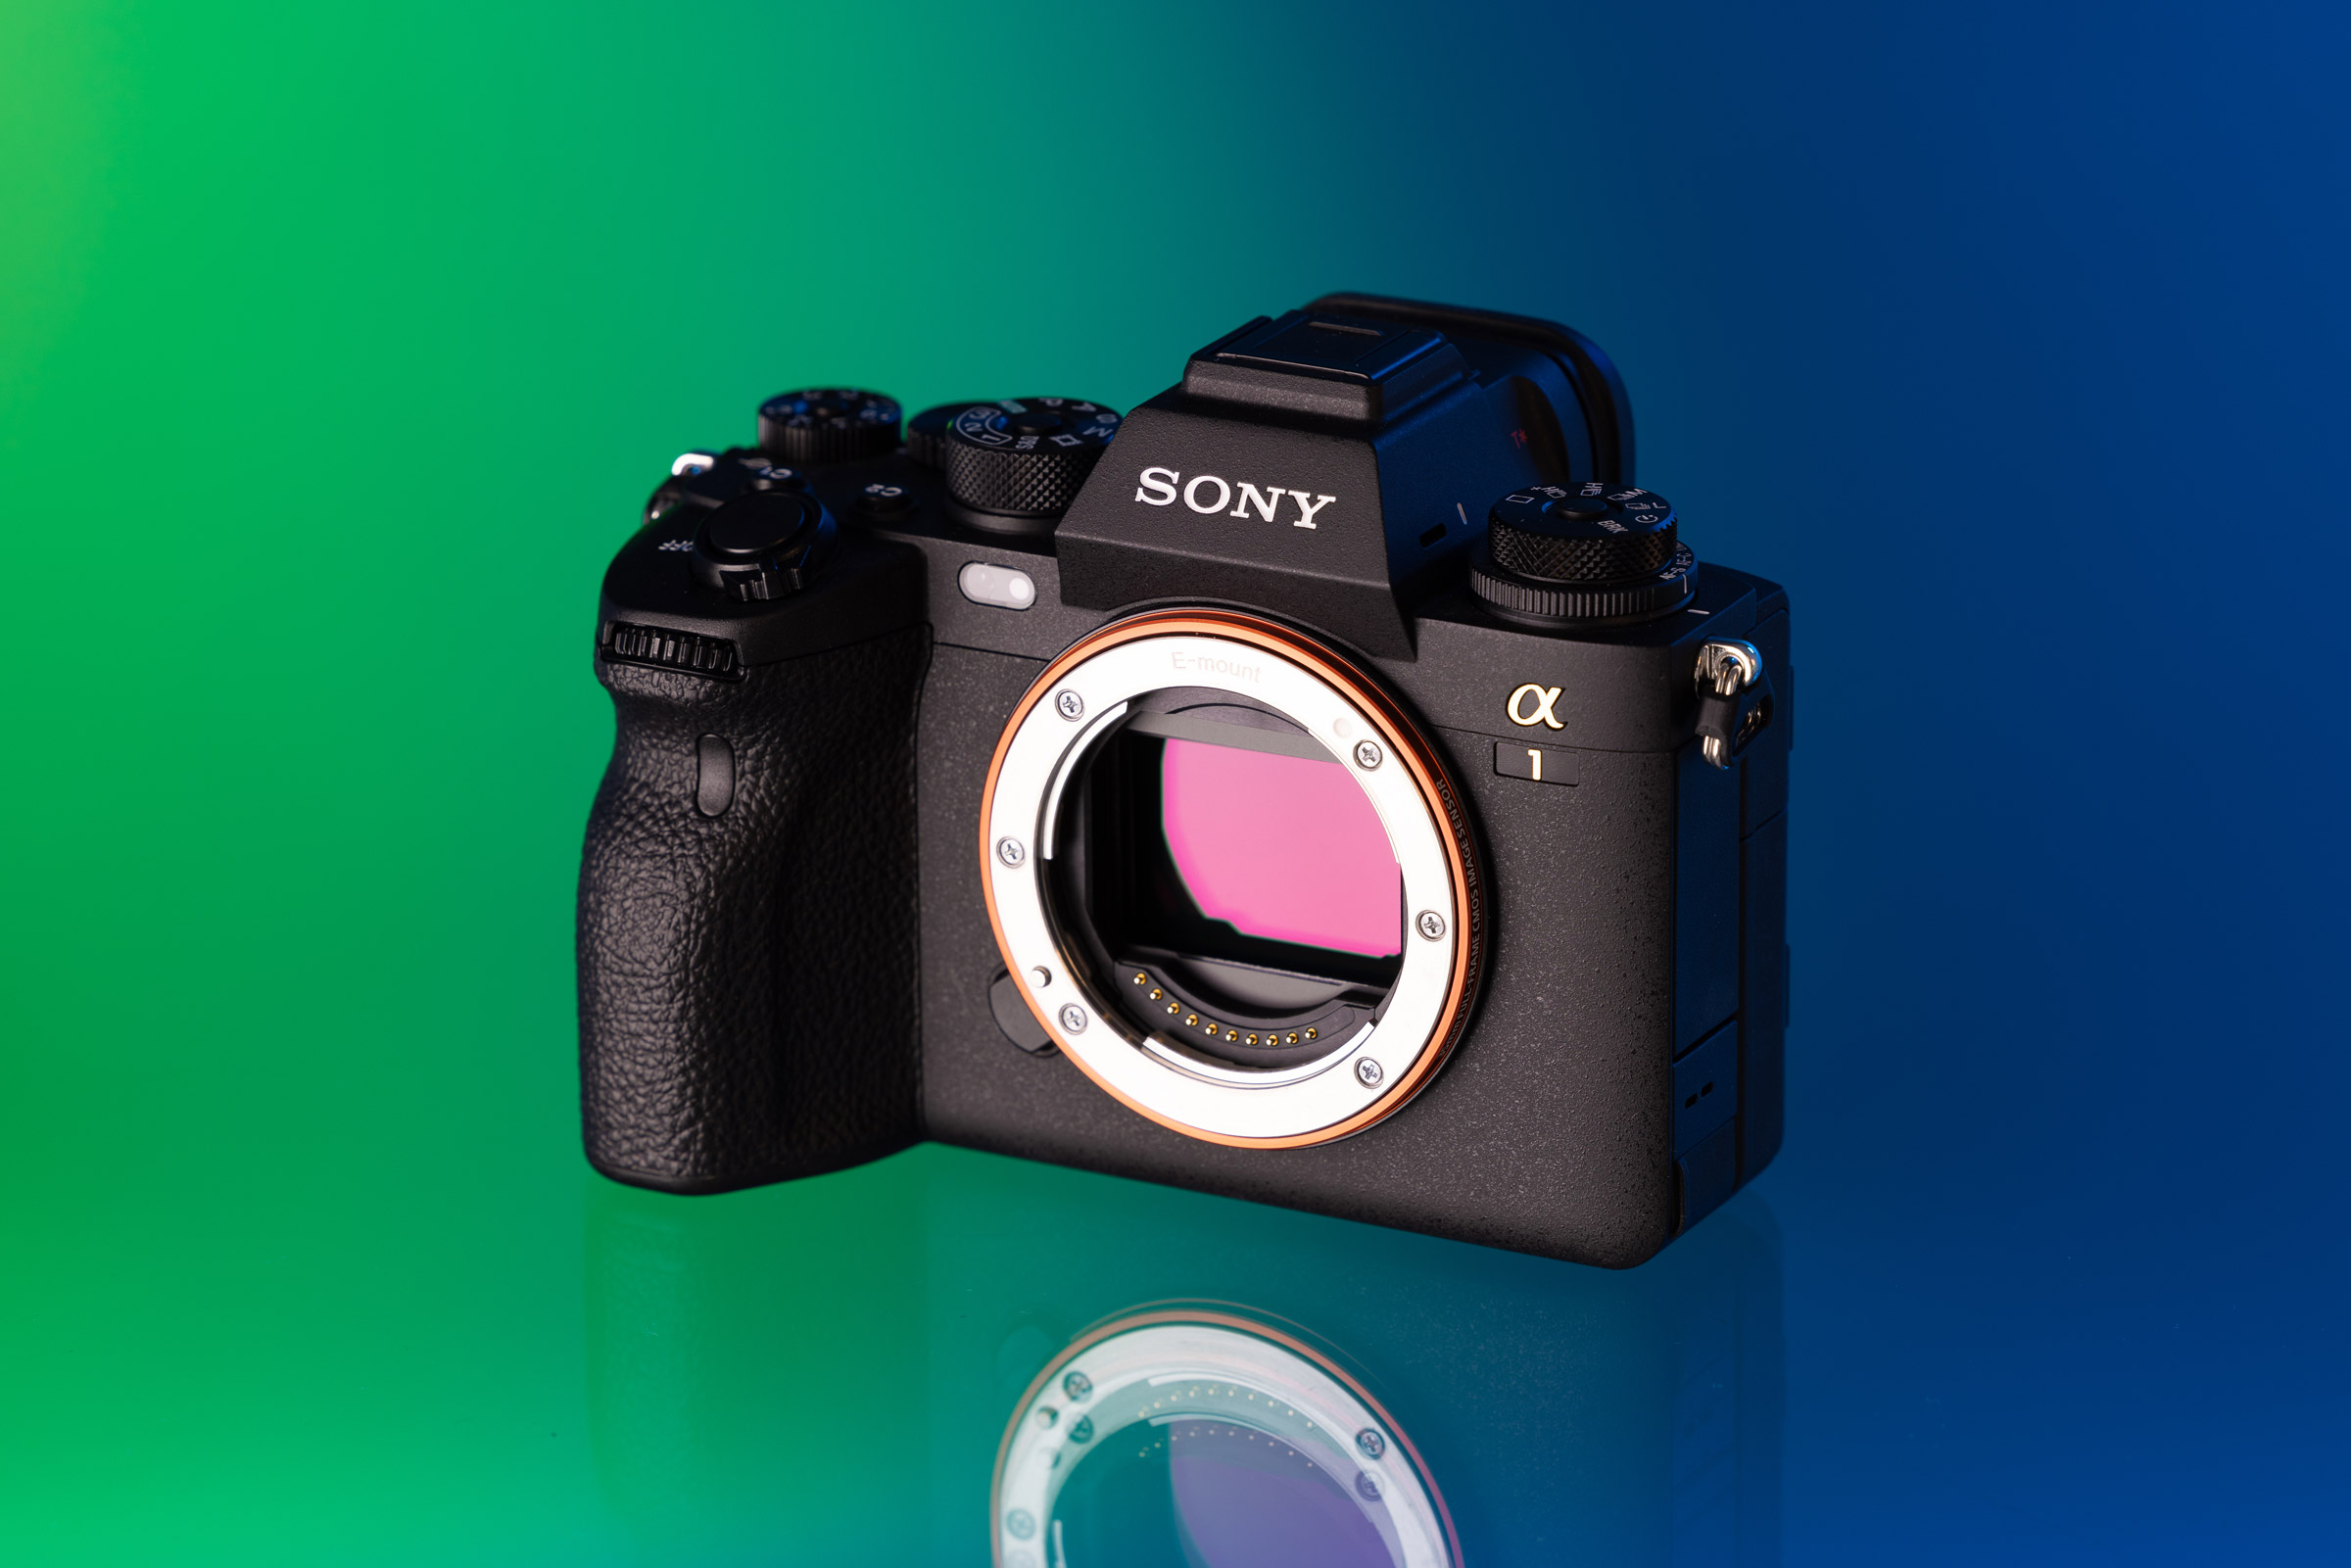 The Sony A7sIII — What can we expect?, by mpb.com